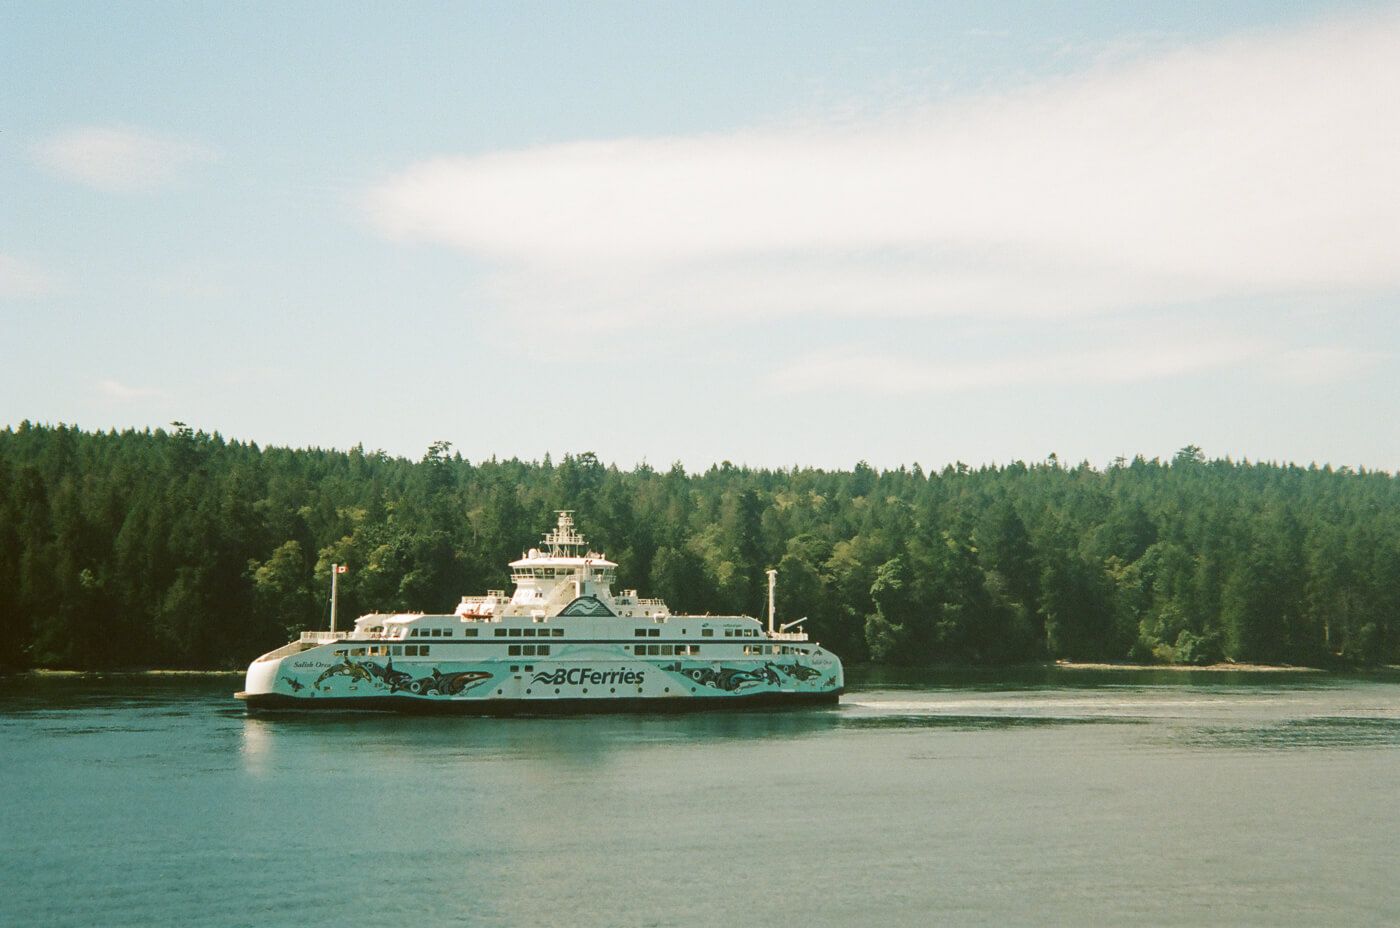 A ferry going past land with lots of trees.